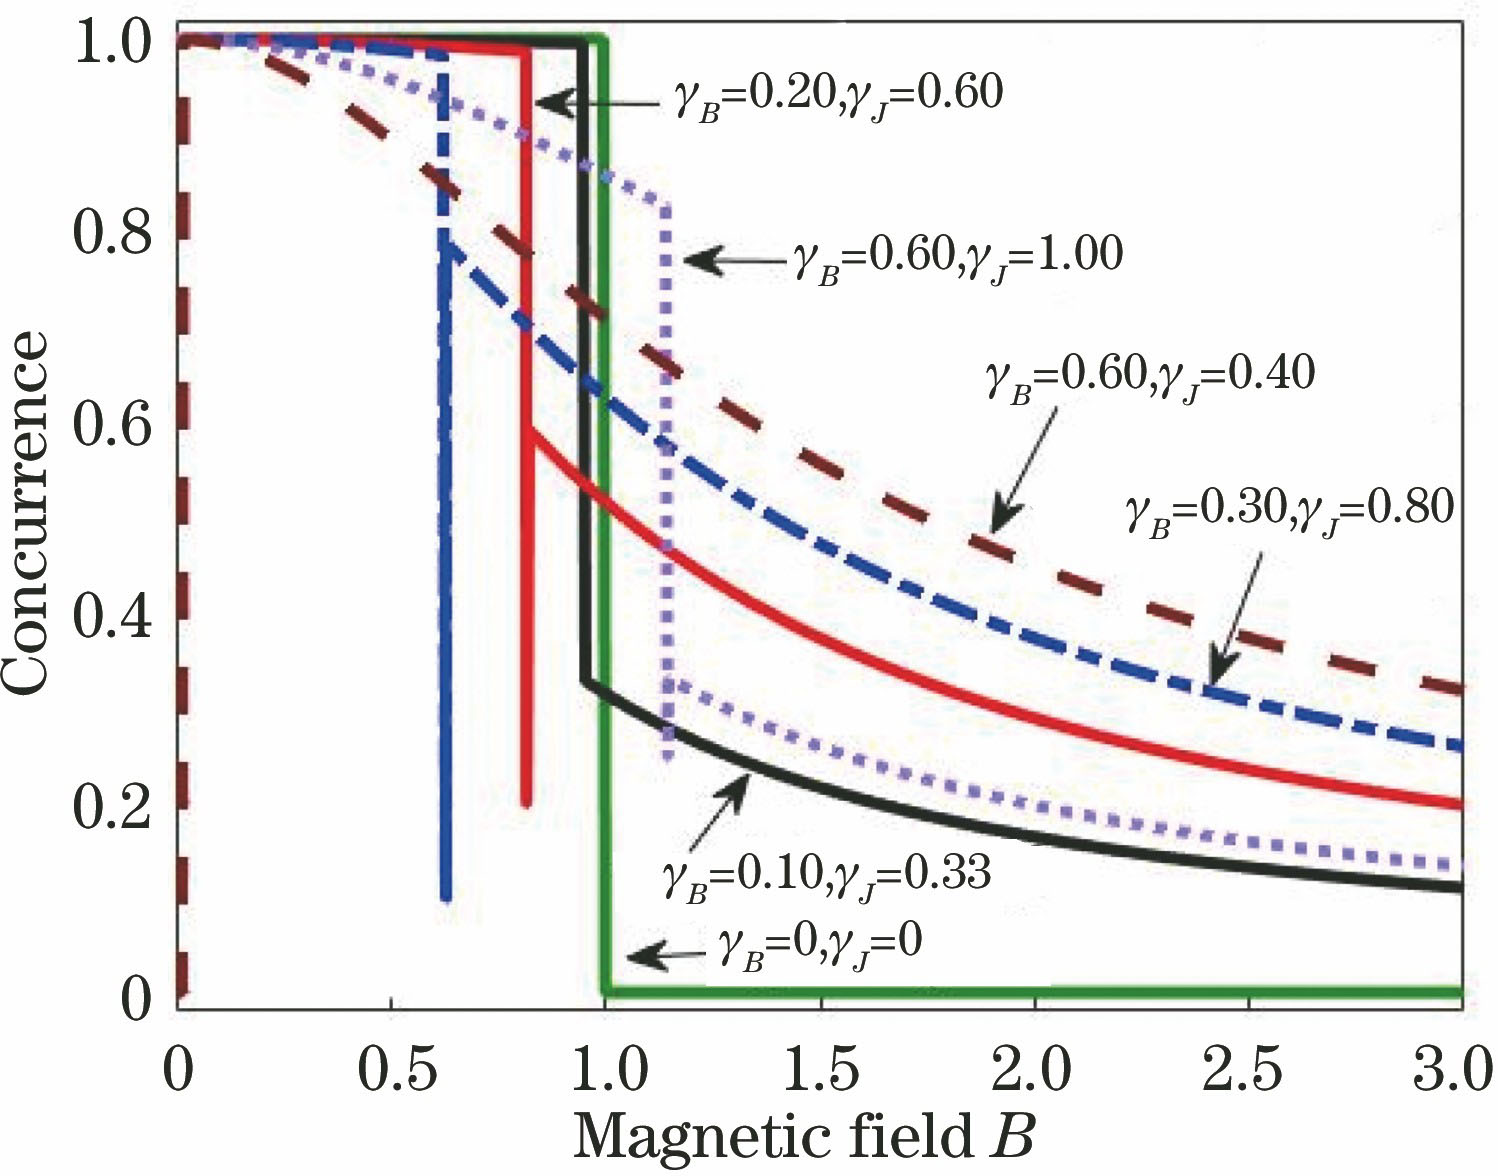 Phase-transition diagram of ground-state entanglement with magnetic field under different anisotropic parametersγBandγJ